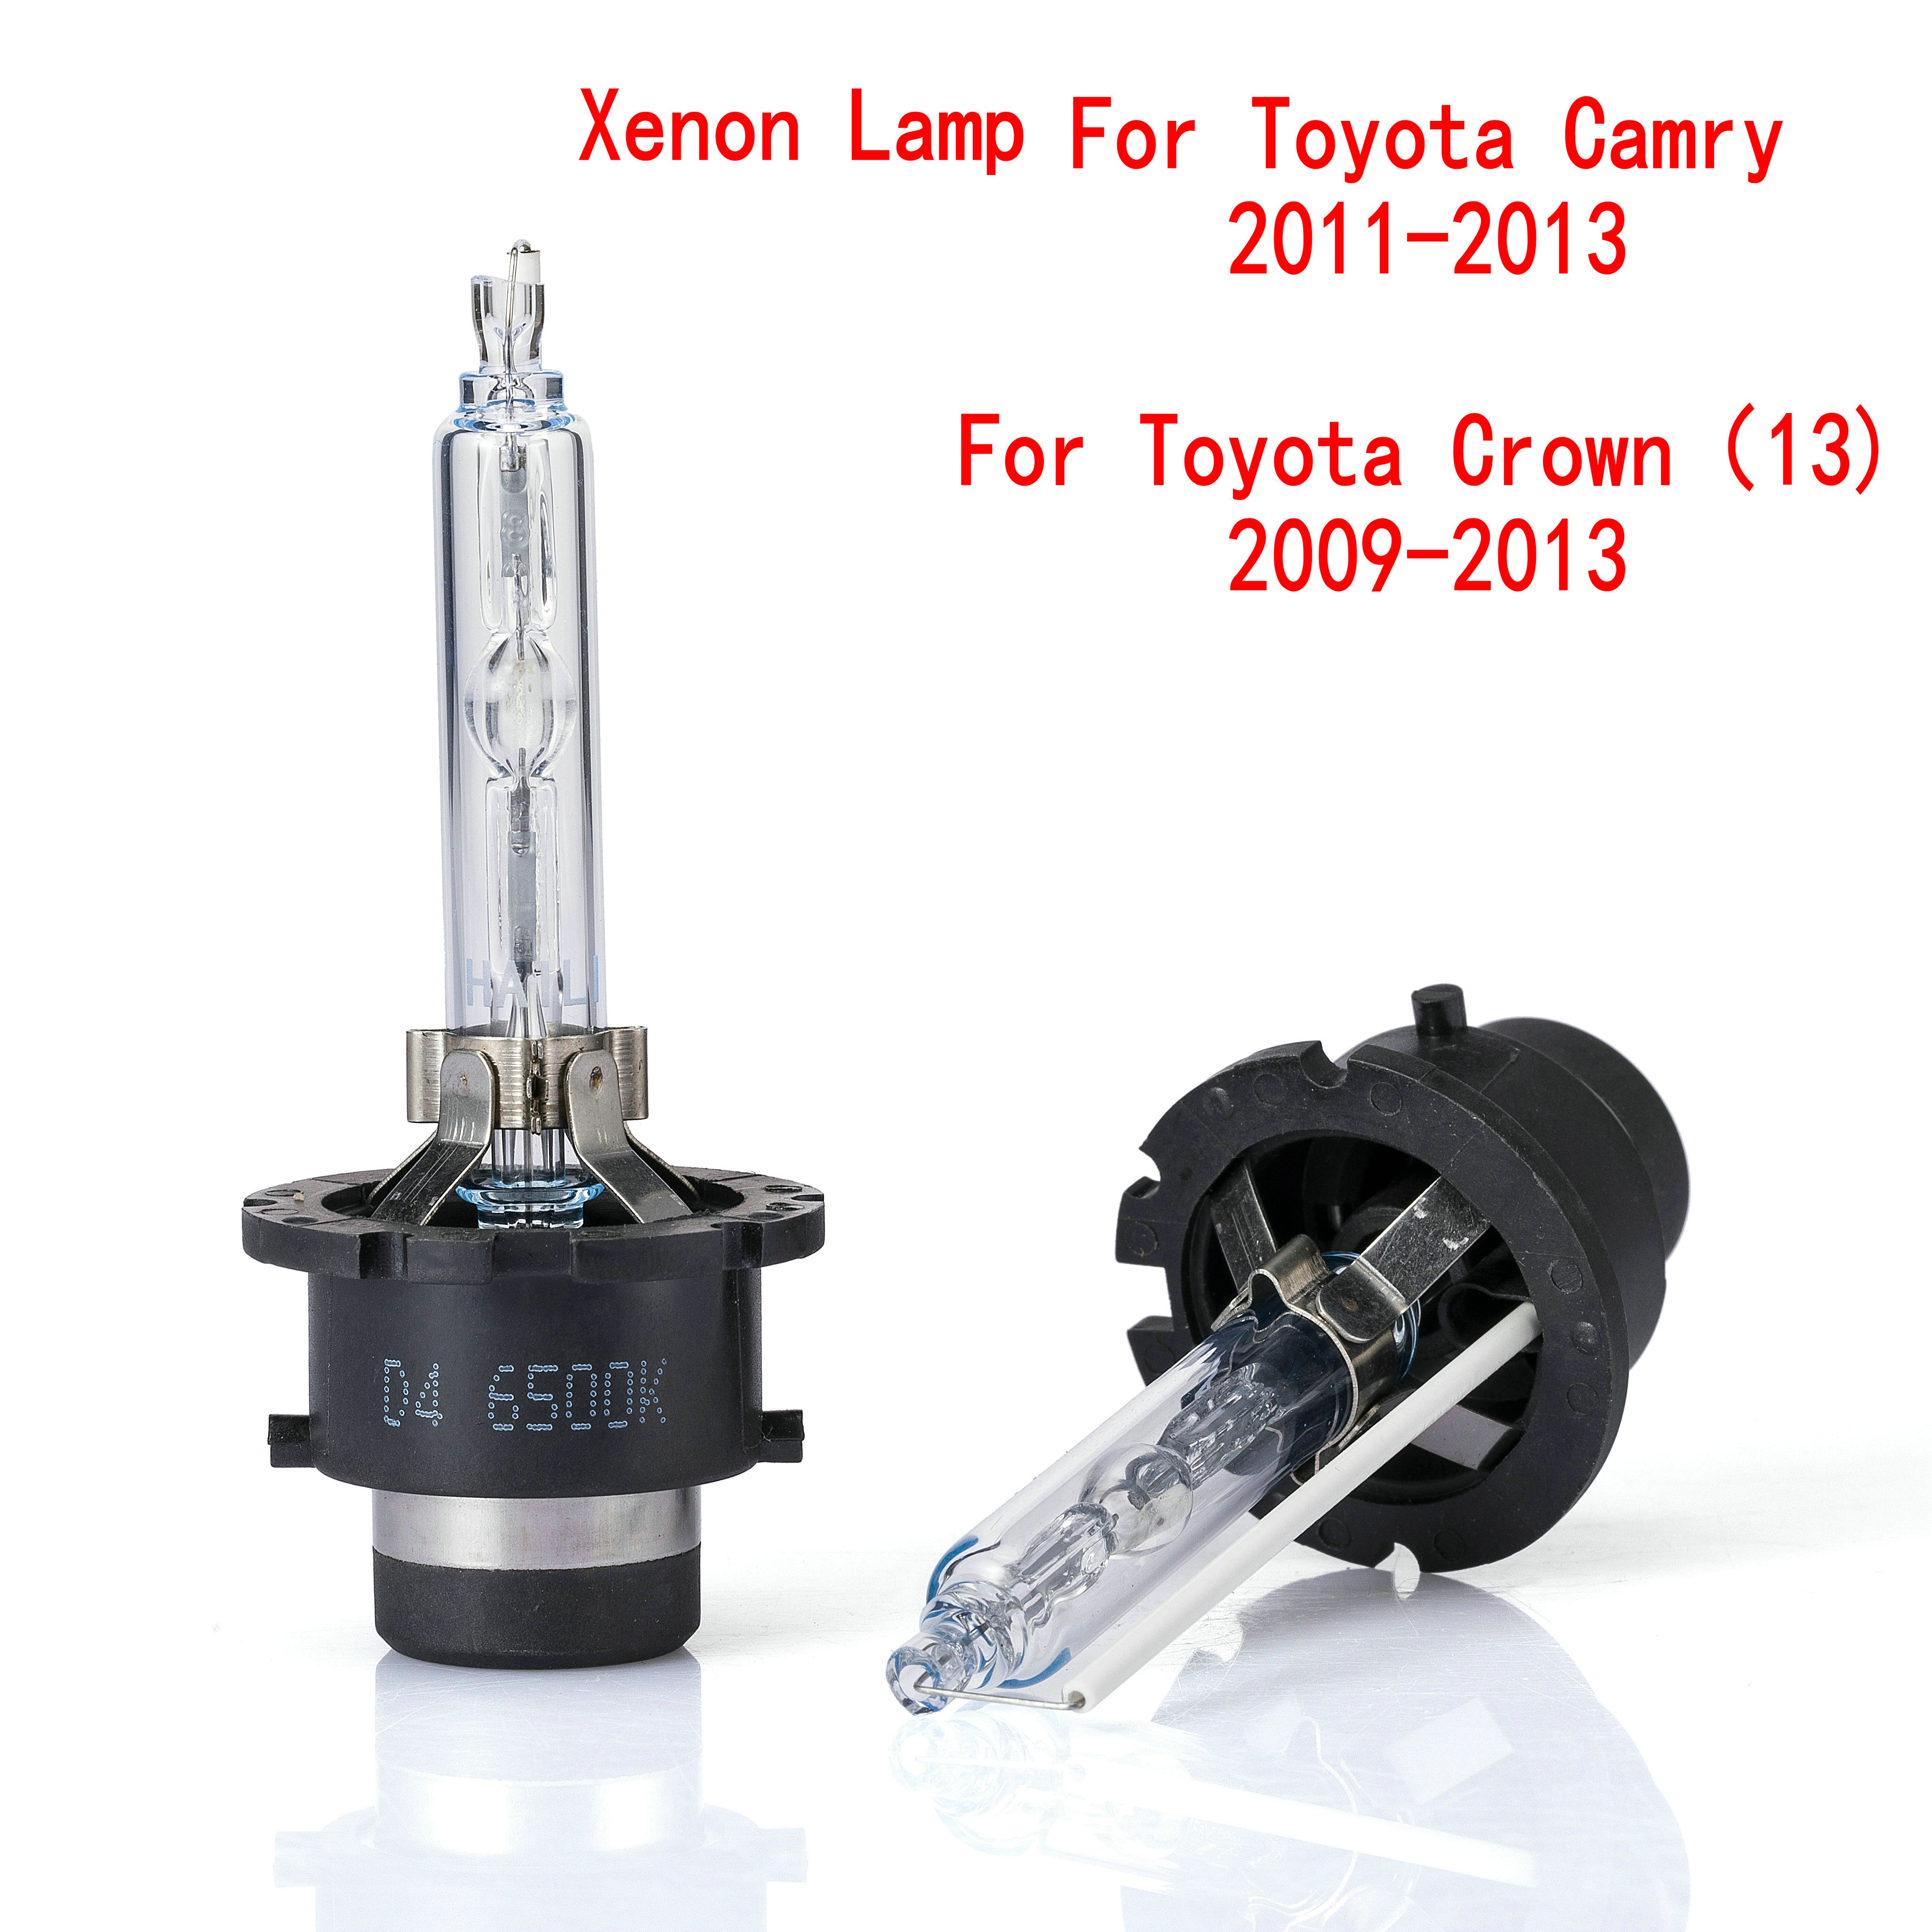 2 Pcs D4S Hid Xenon Lamp Voor Toyota Camry Auto Koplamp Xenon Lamp Voor Toyota Crown Wit En Koud Blauw